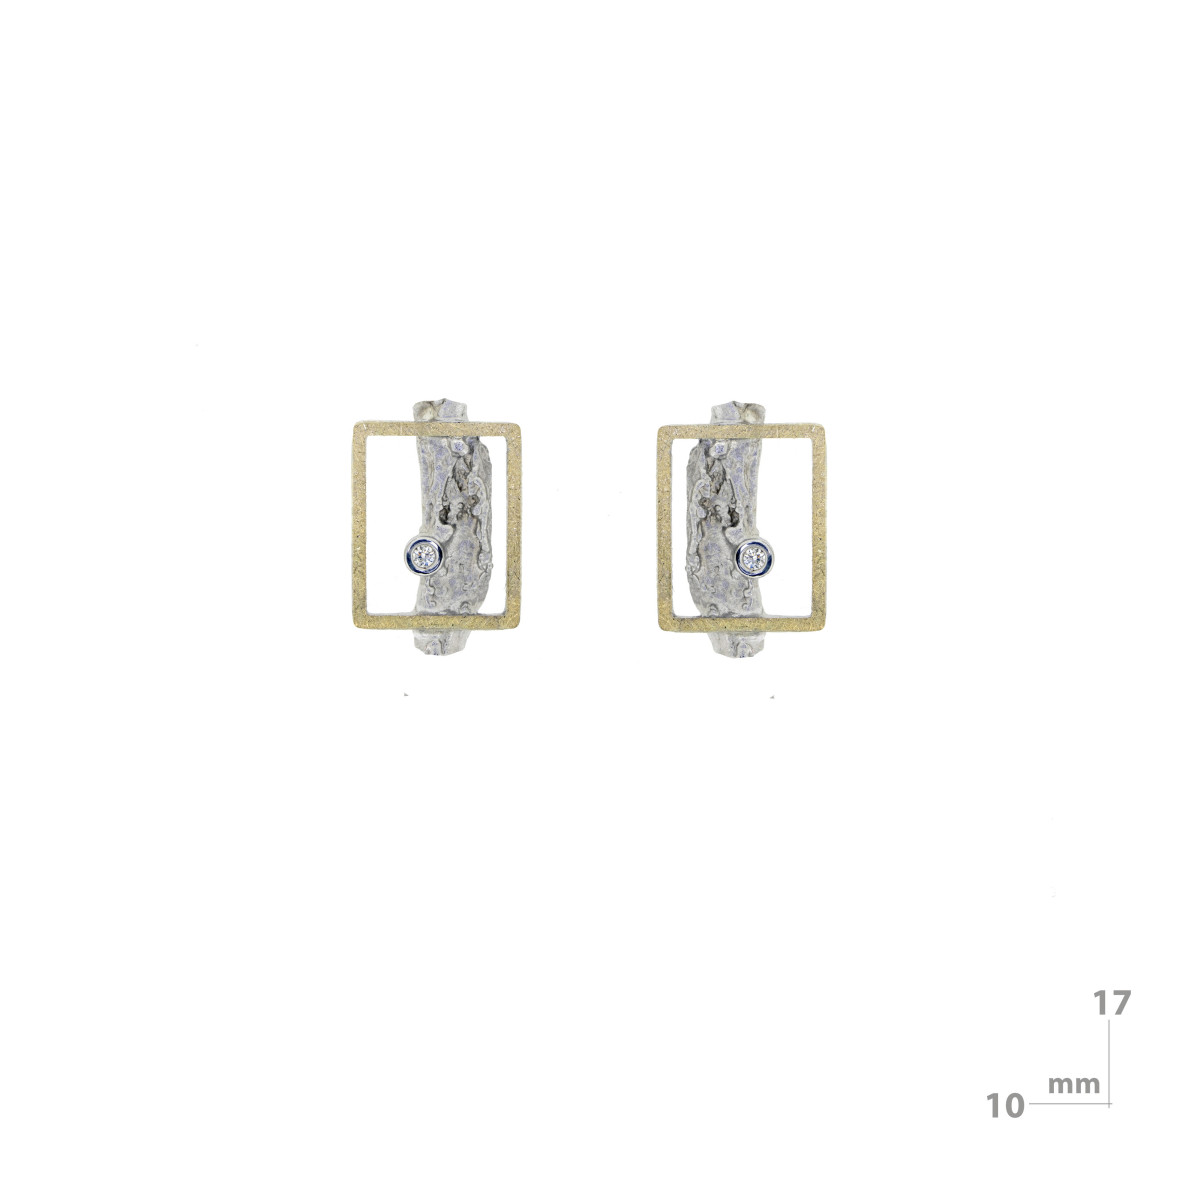 Silver, gold and diamond earrings